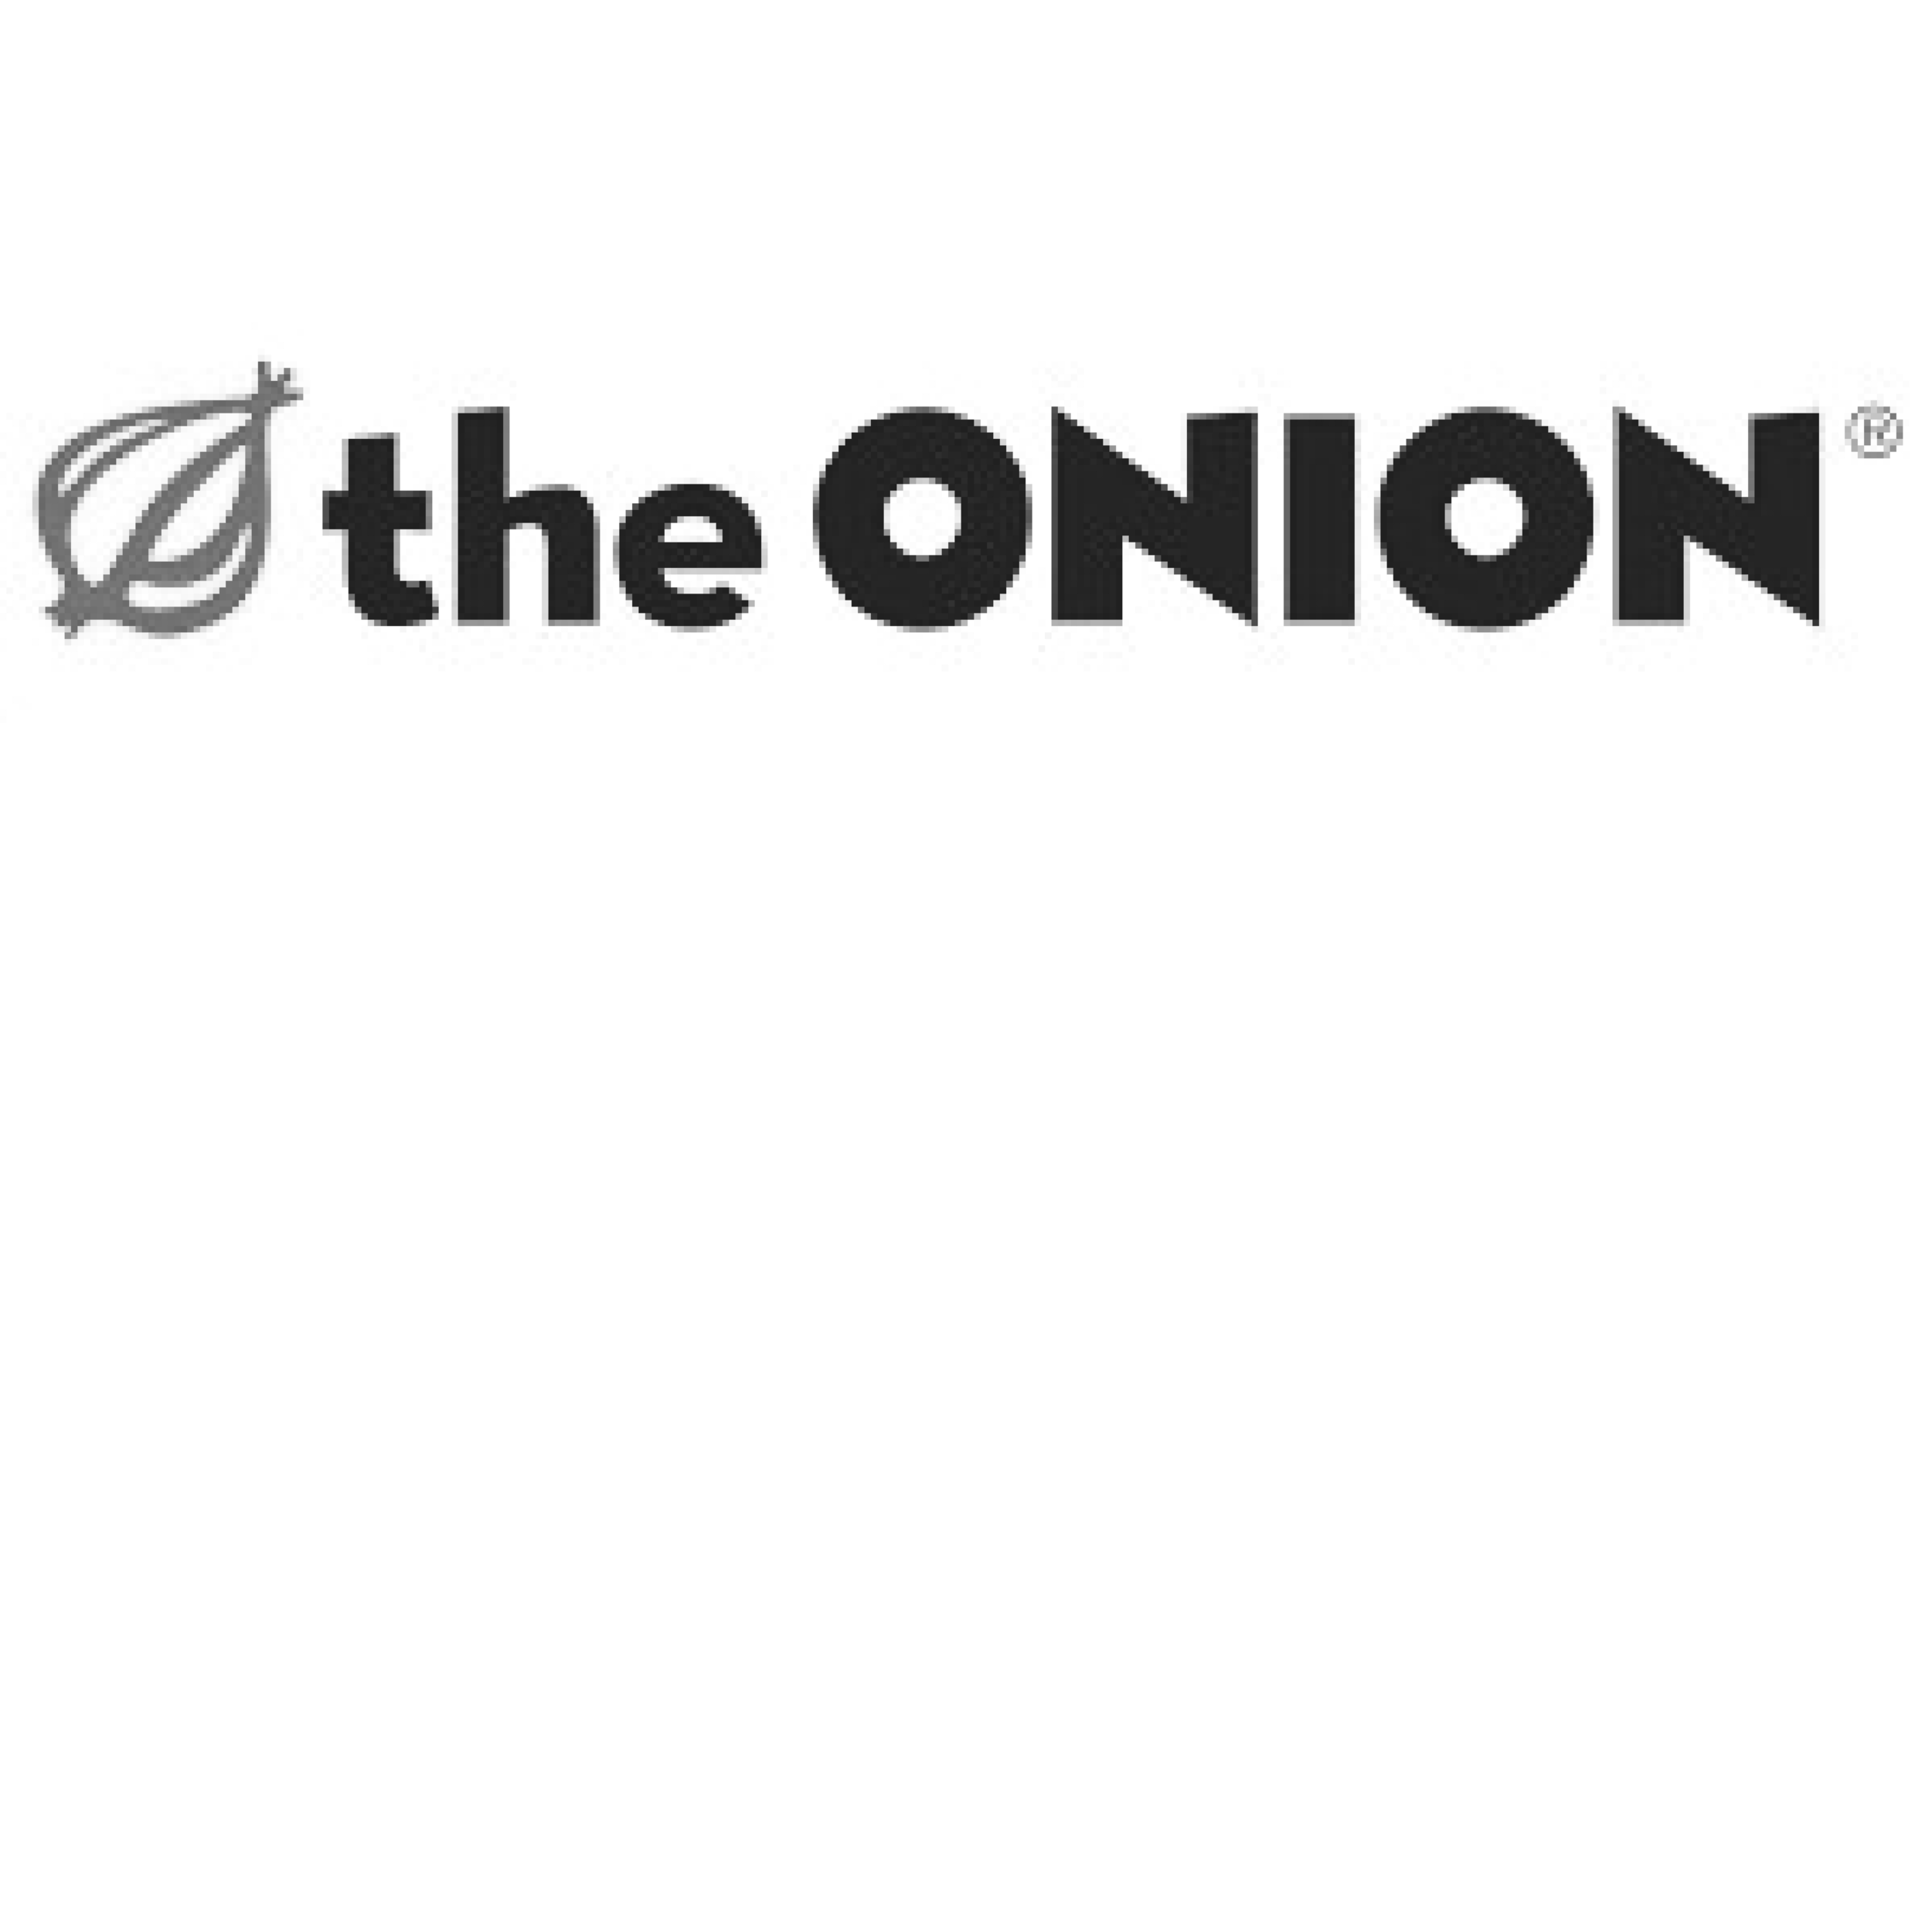 TheOnion Final.png